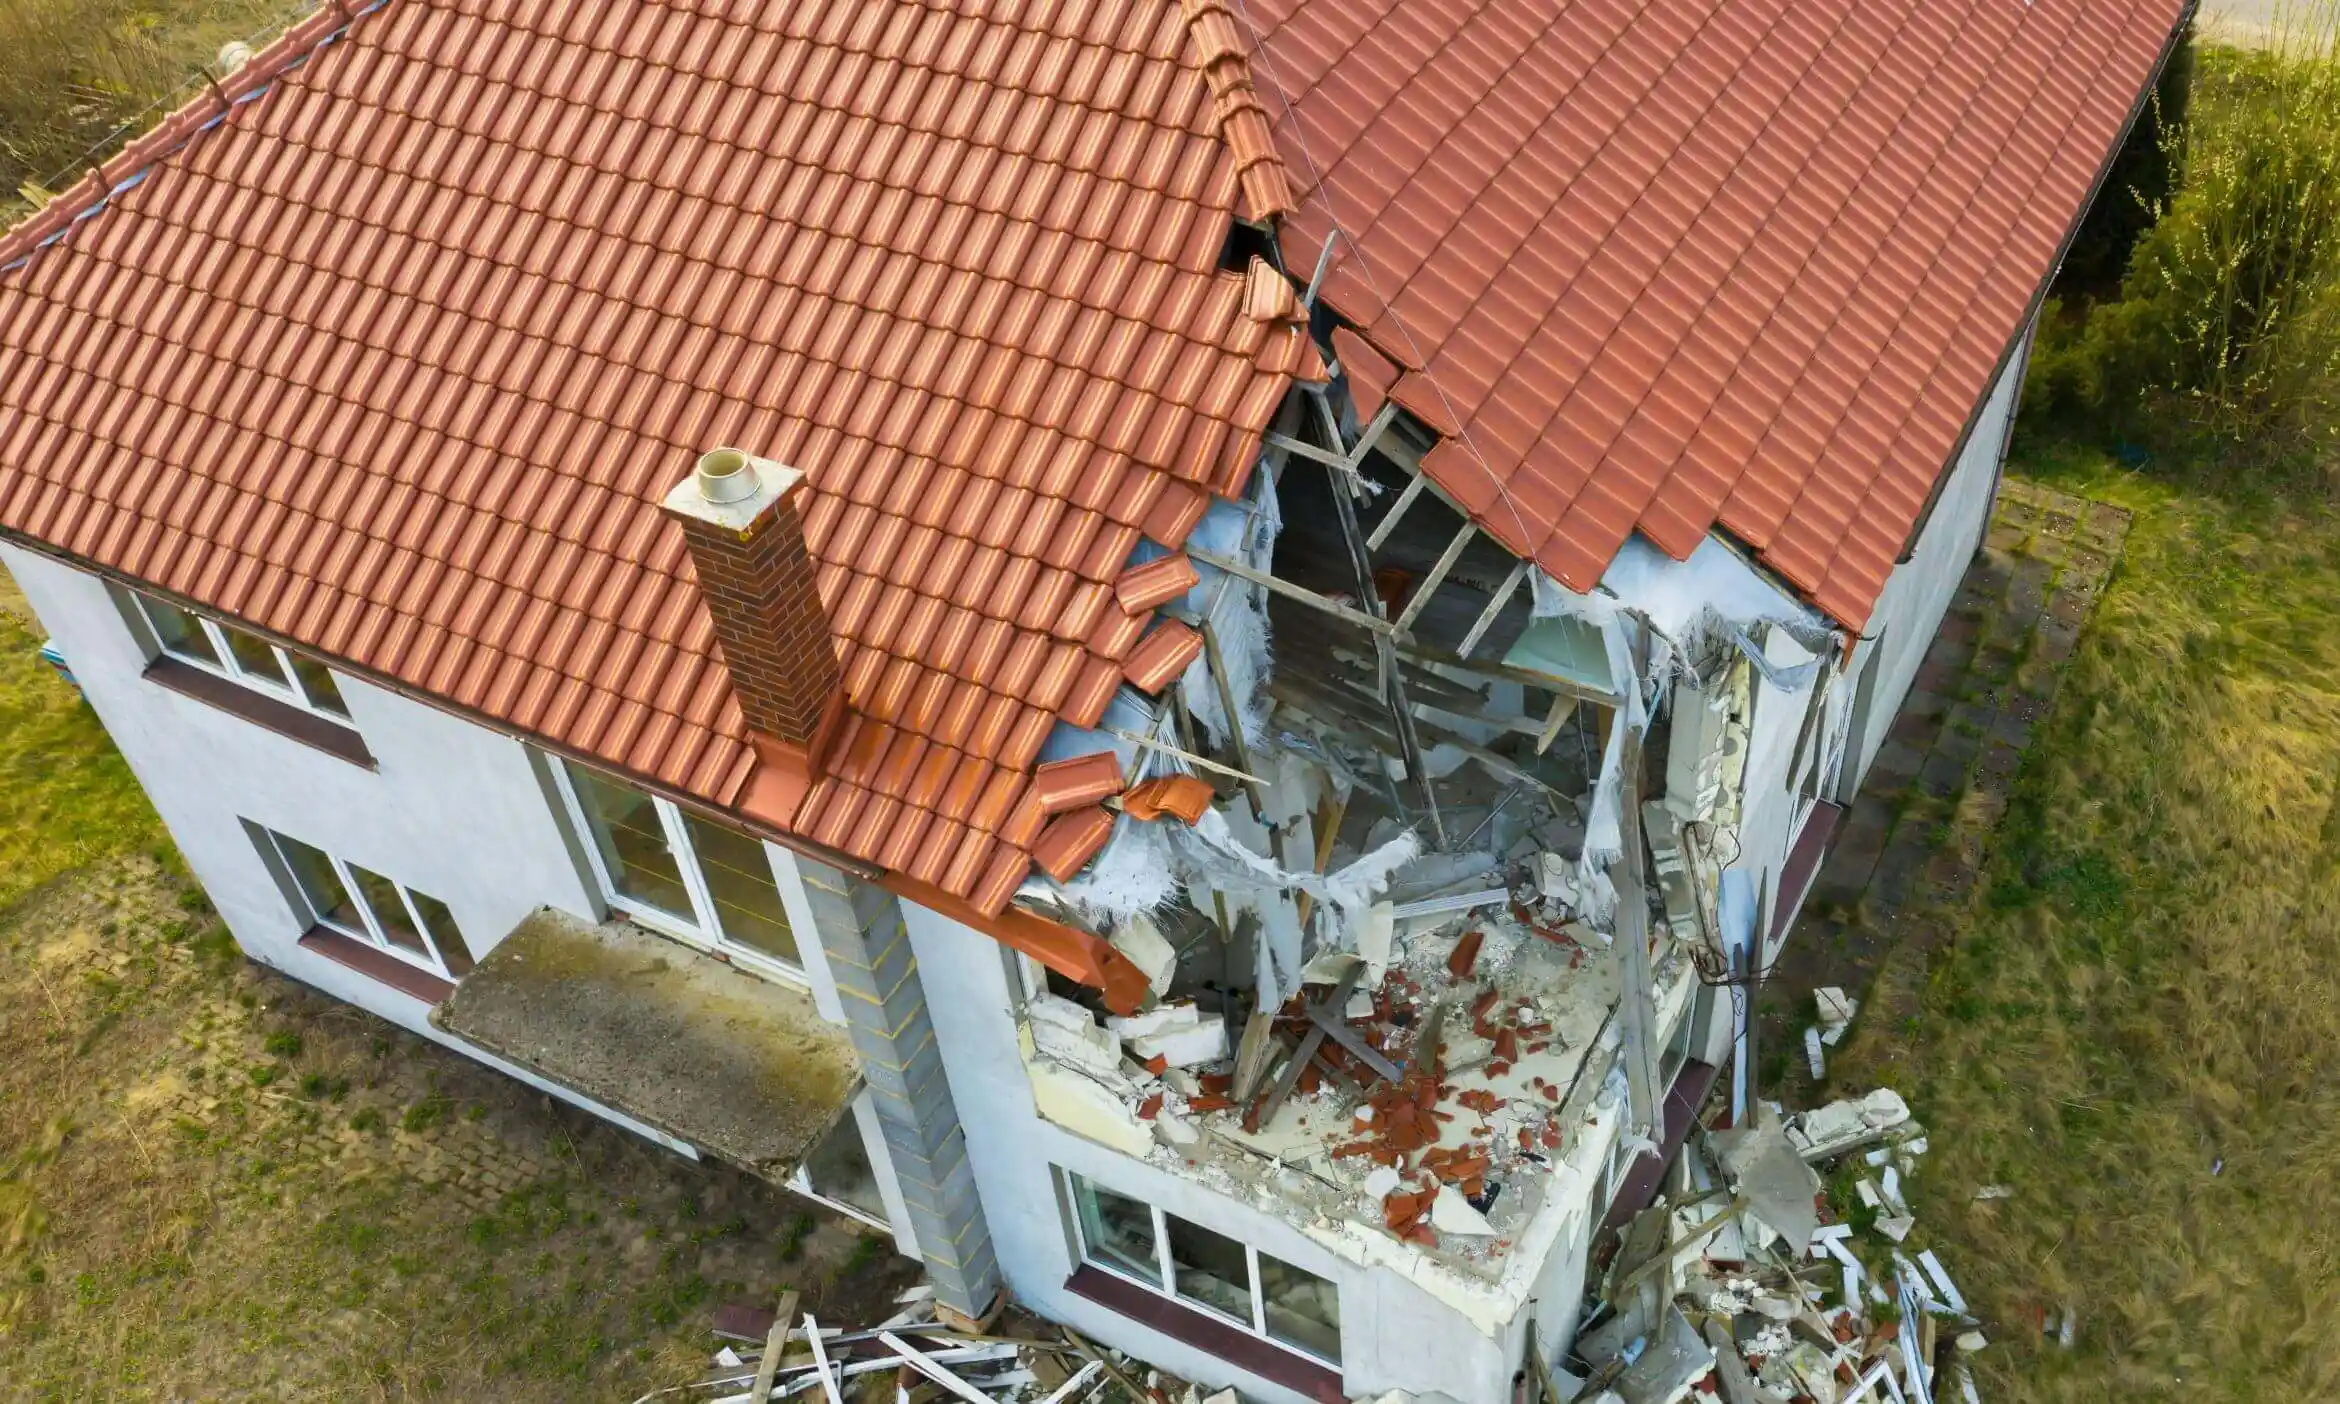 An aerial shot of a red shingle roof house damaged by a storm.